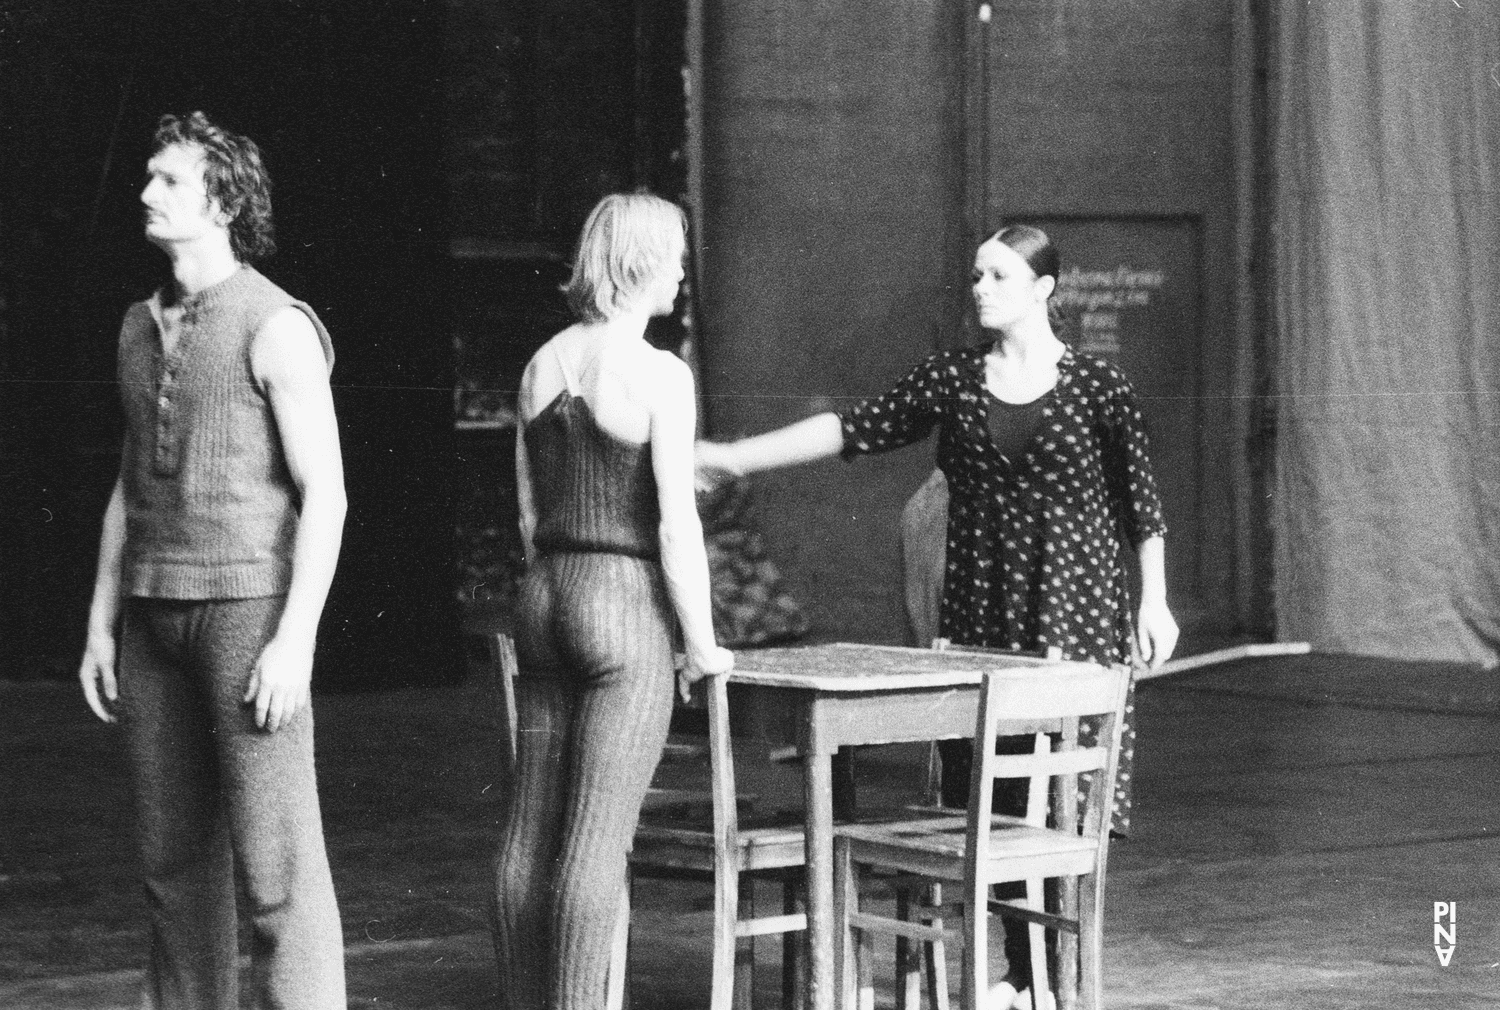 Dominique Mercy, Jan Minařík and Malou Airaudo in “Adagio – Five Songs by Gustav Mahler” by Pina Bausch